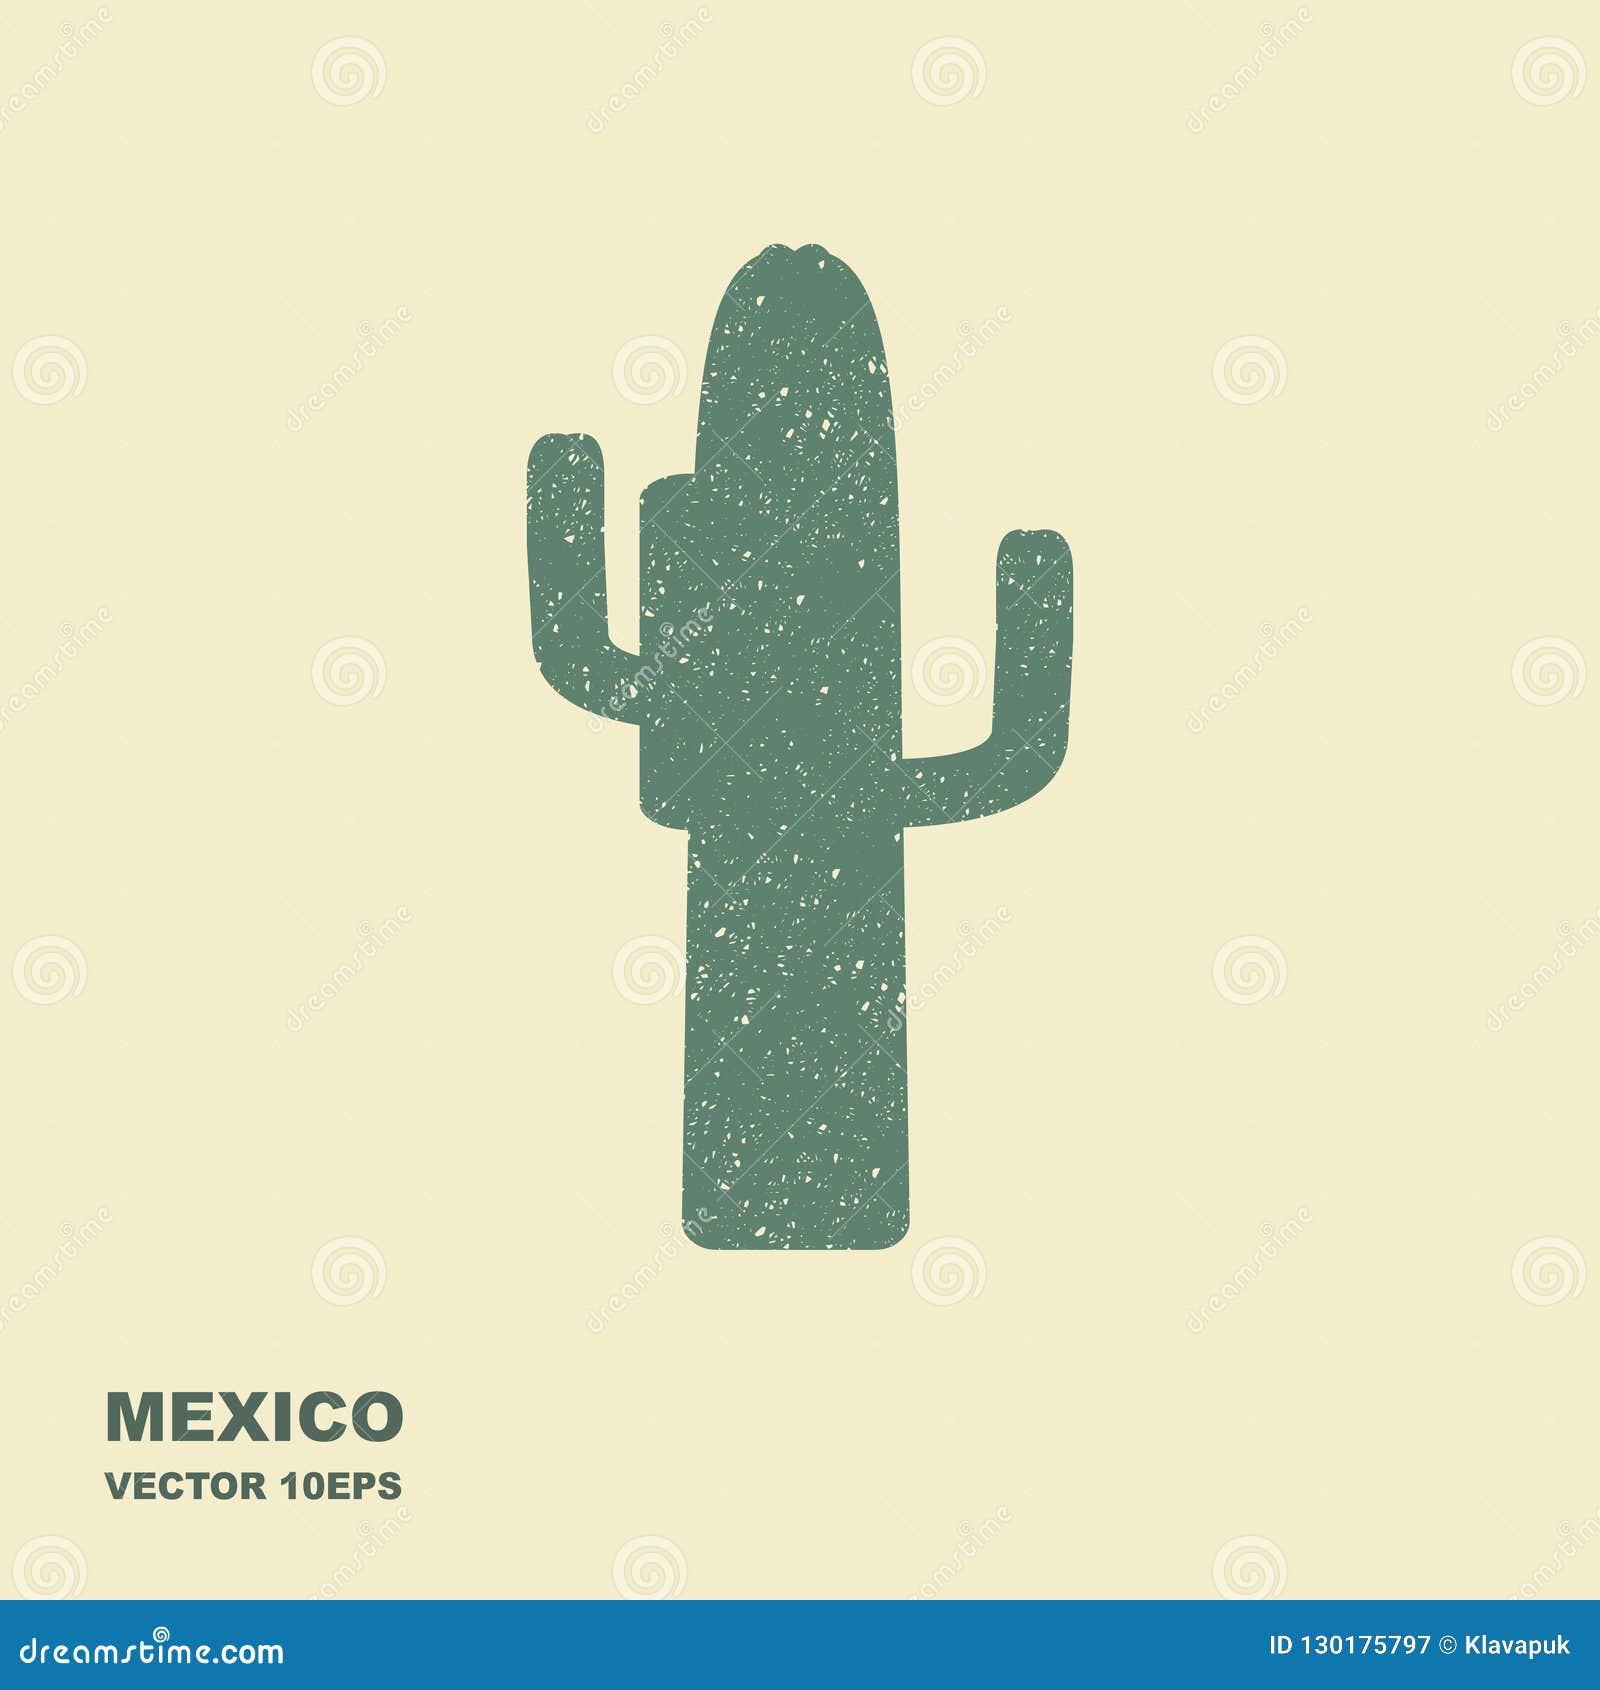 mexican cactus. stylized flat icon with scuffed effect